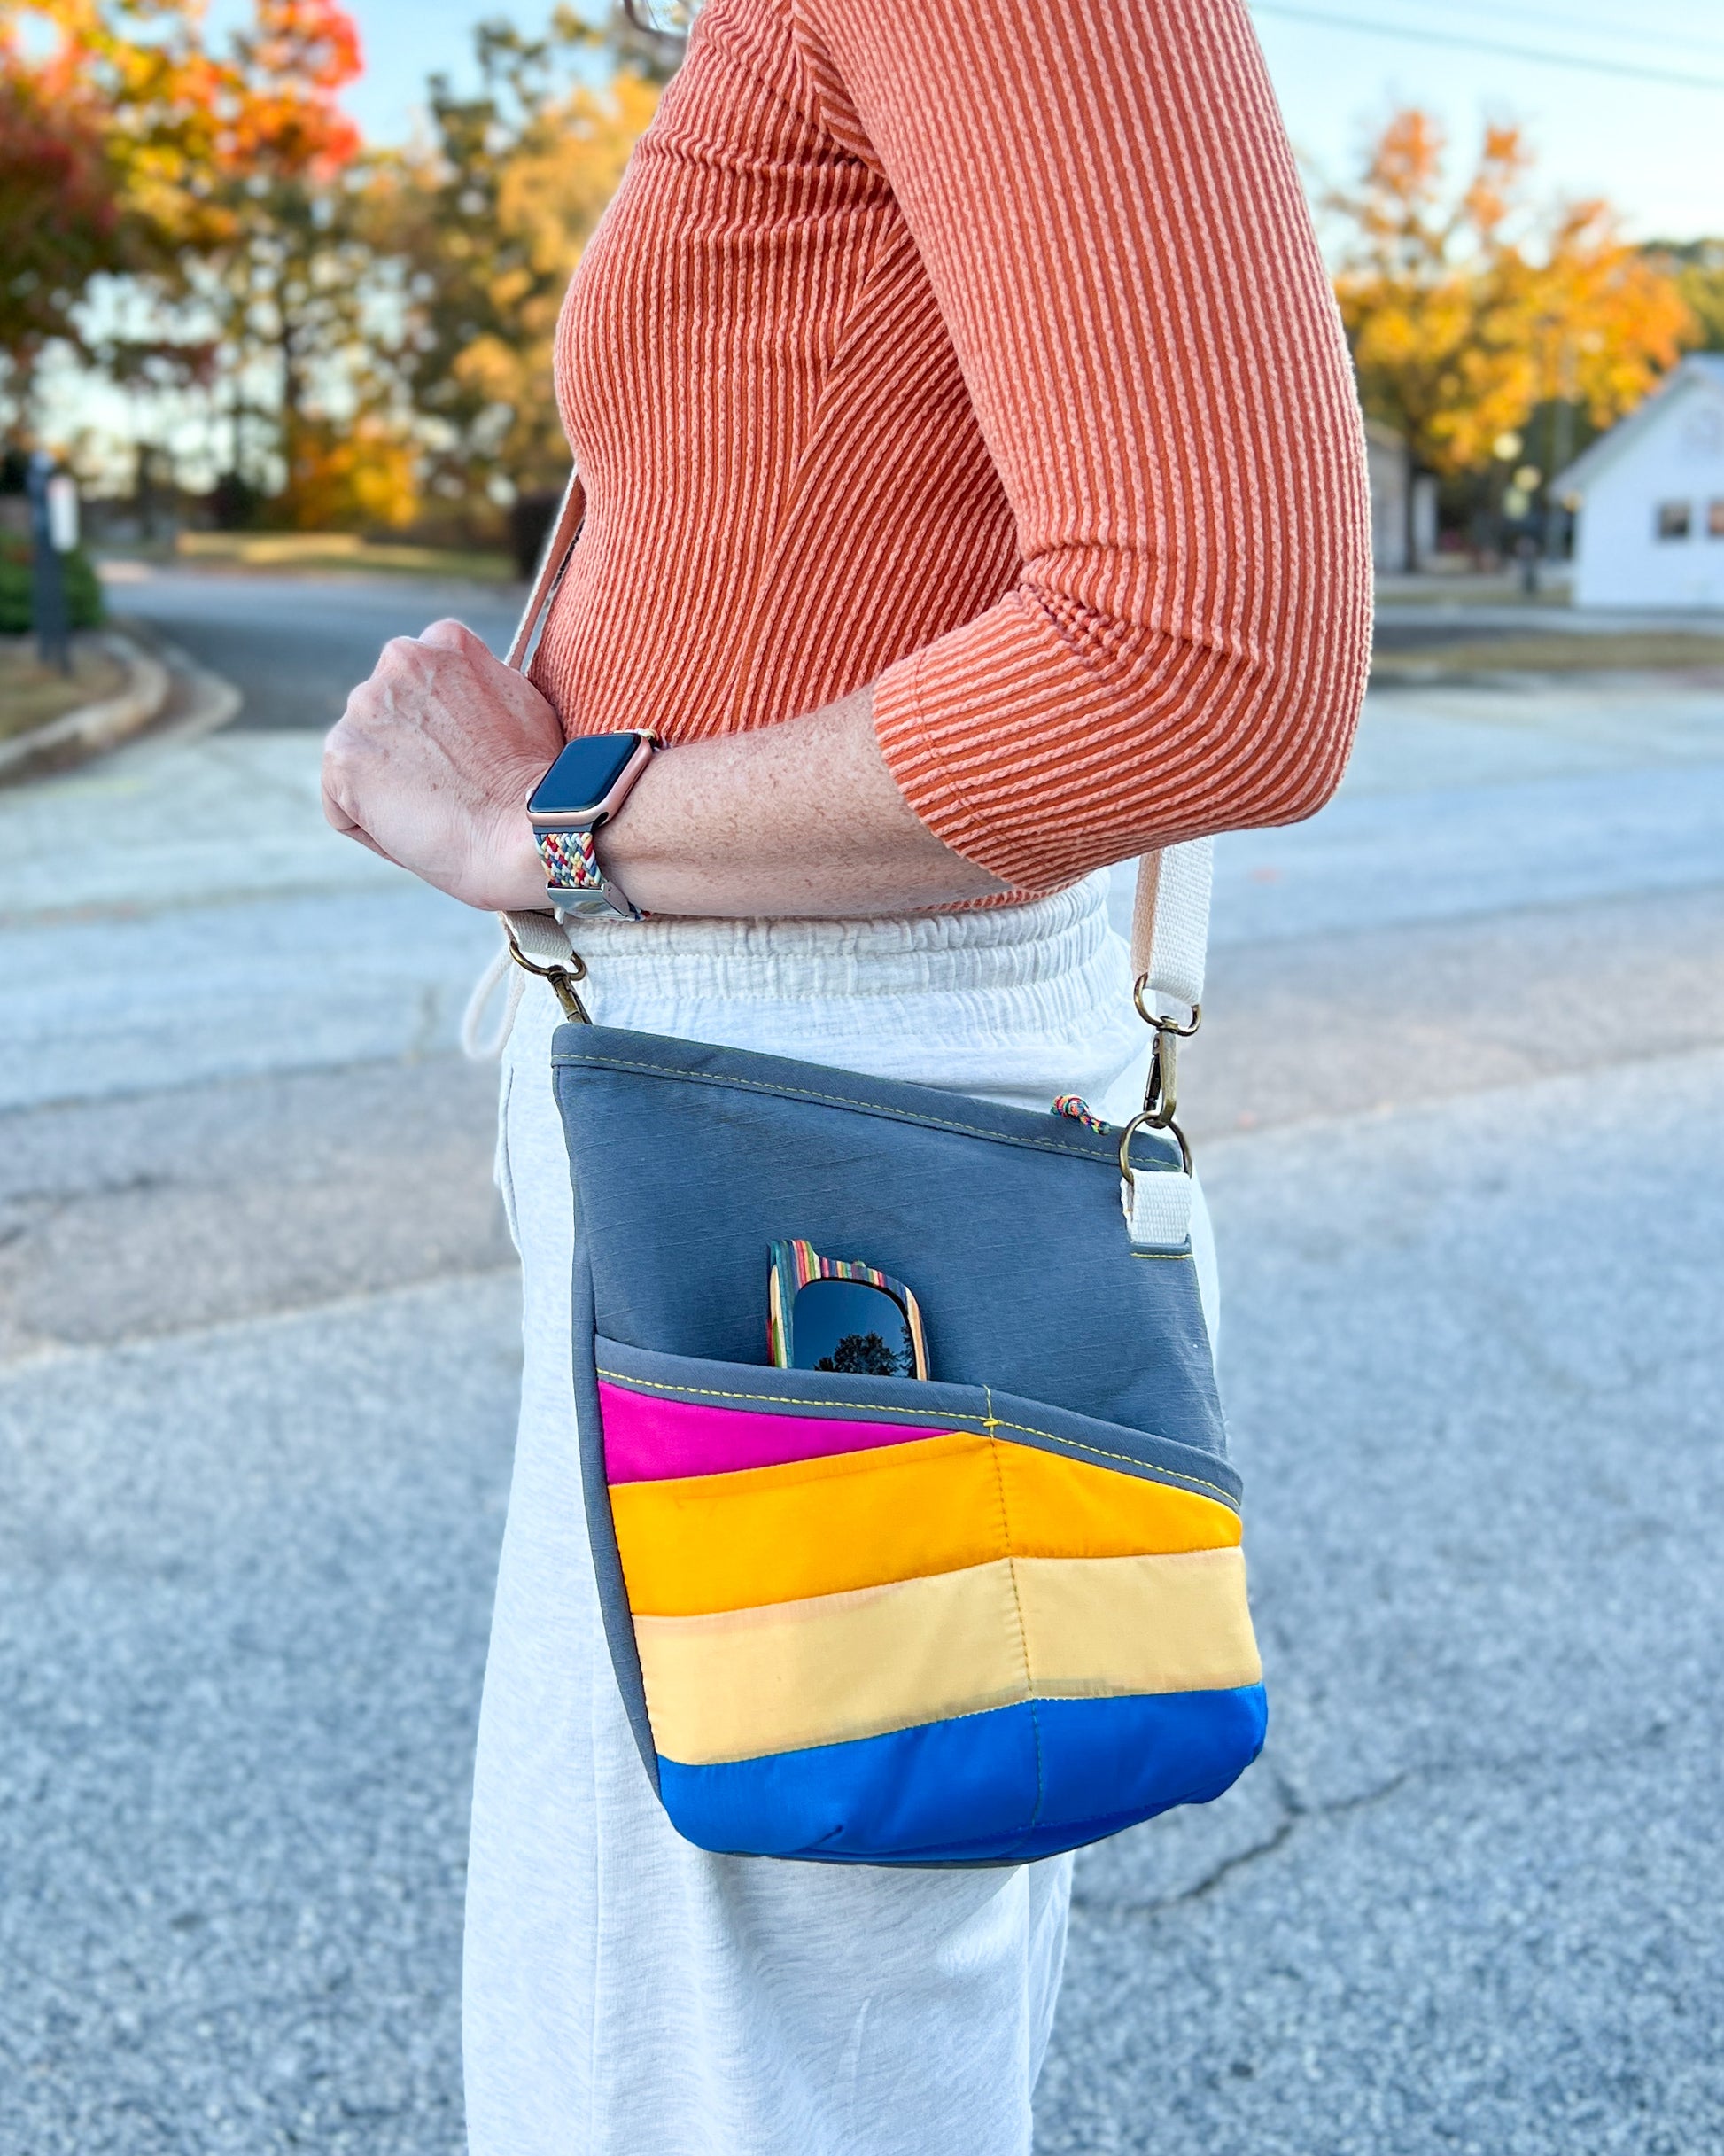 Image of pink, yellow, and blue Rivet Allegro Crossbody Bag being worn.